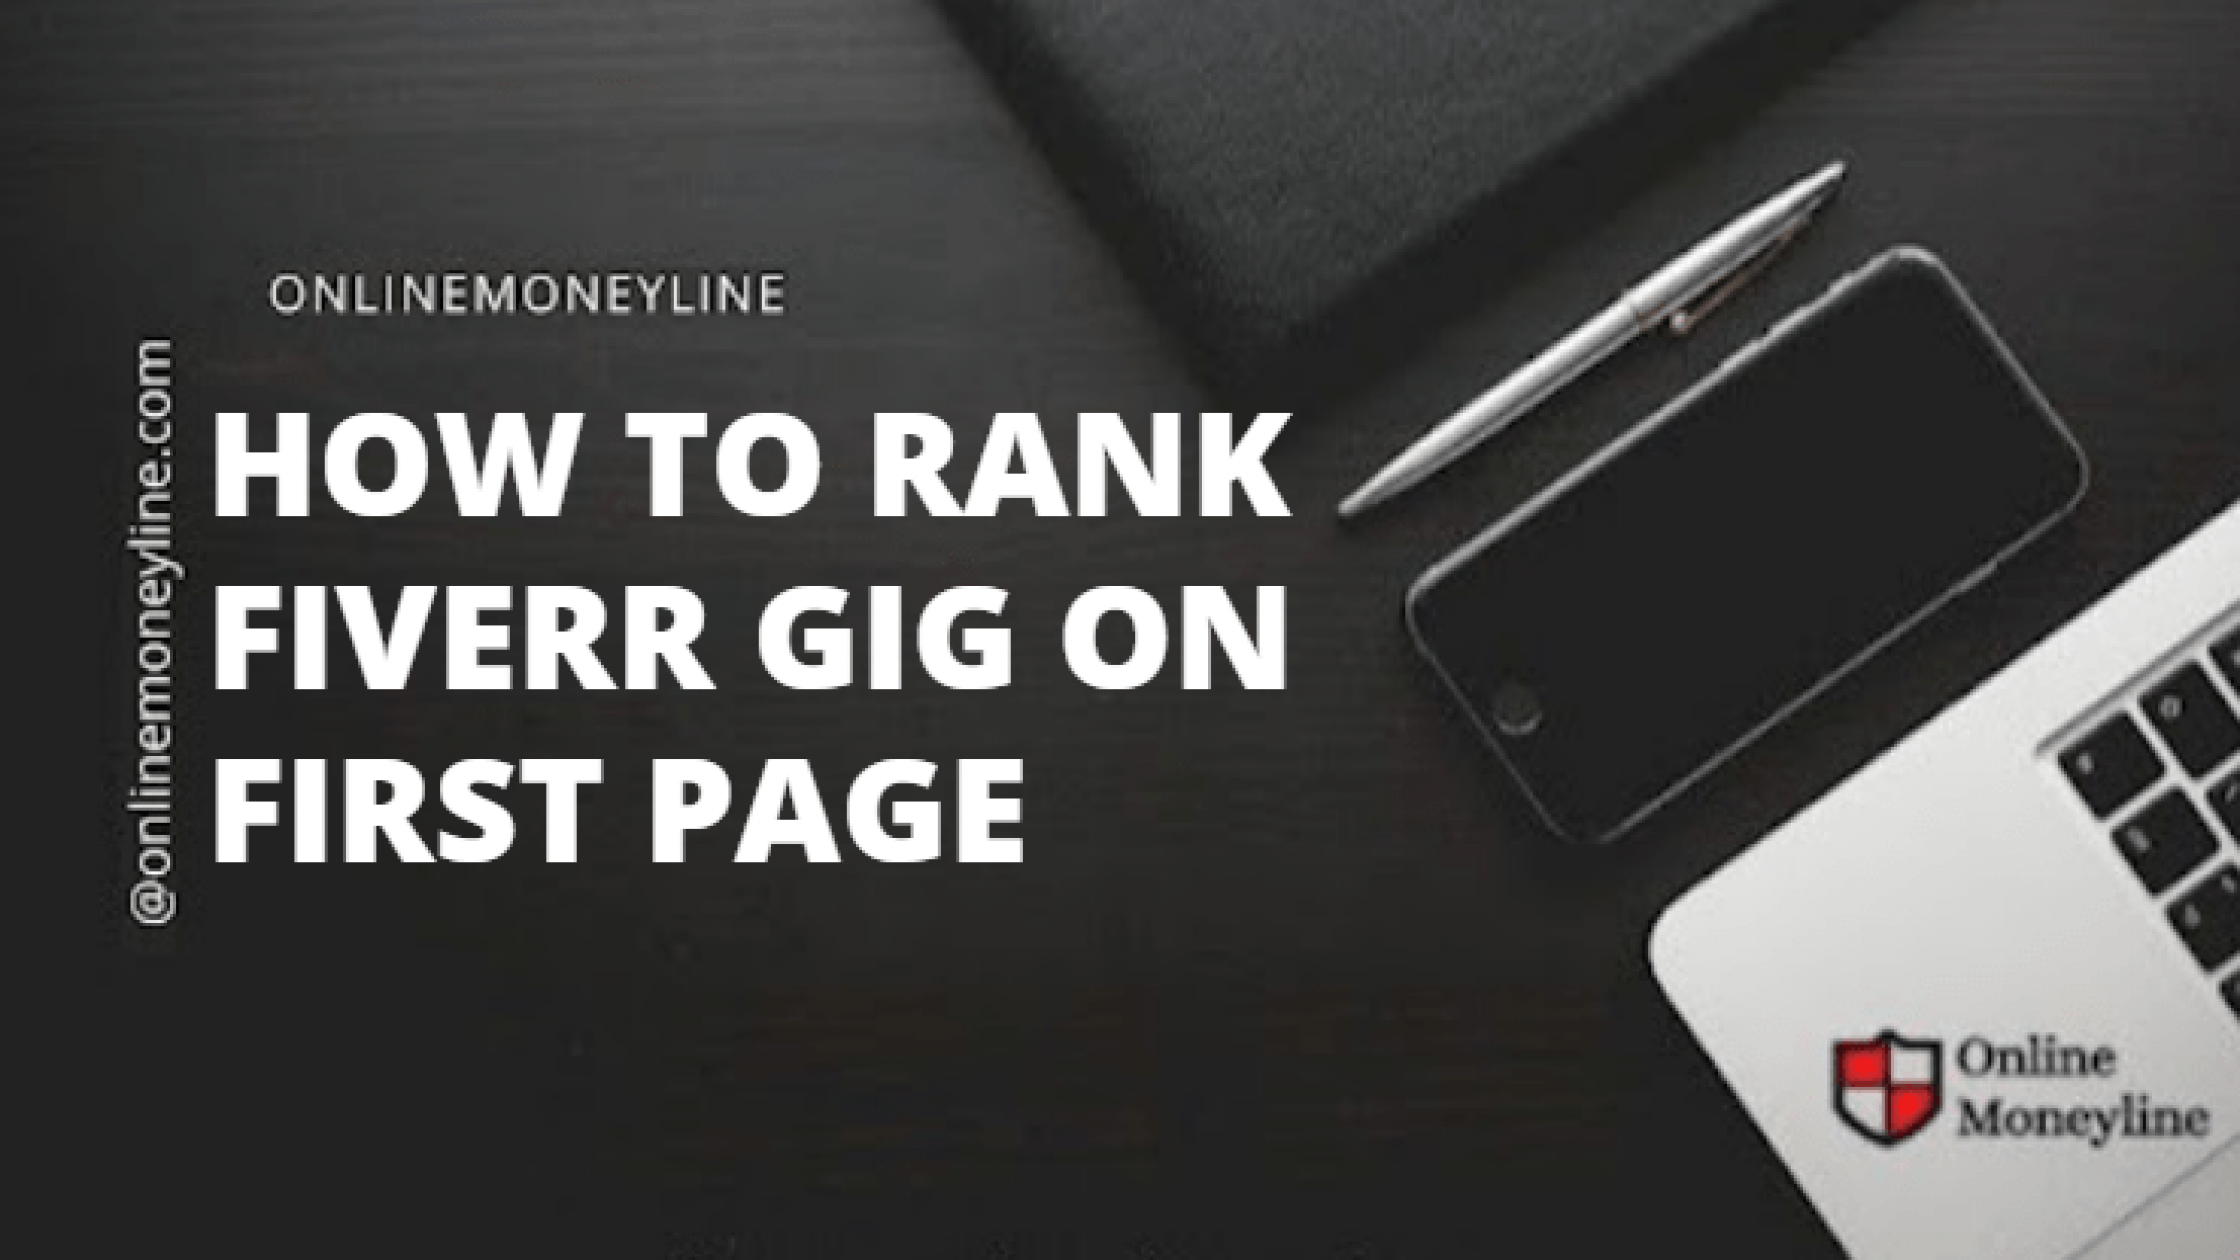 How To Rank Fiverr Gig On First Page